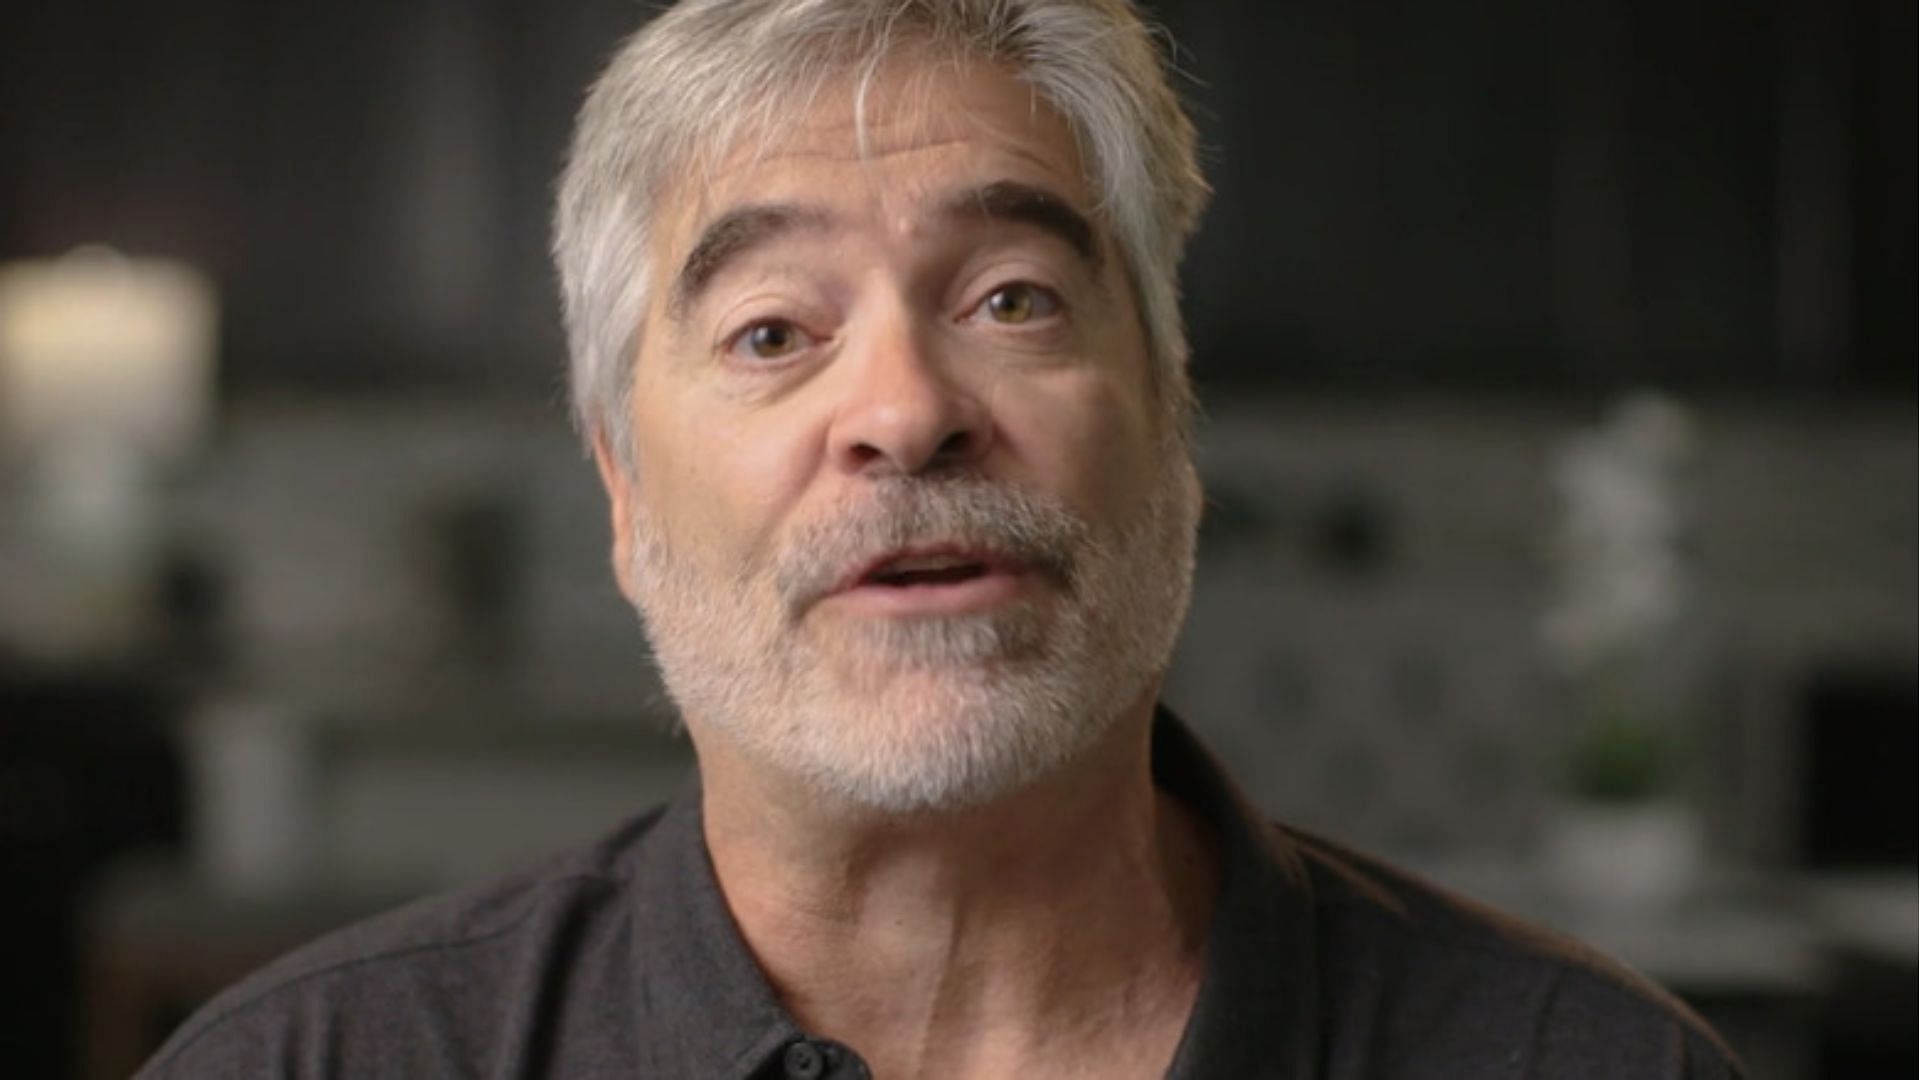 Vince Russo had some interesting things to talk about this week